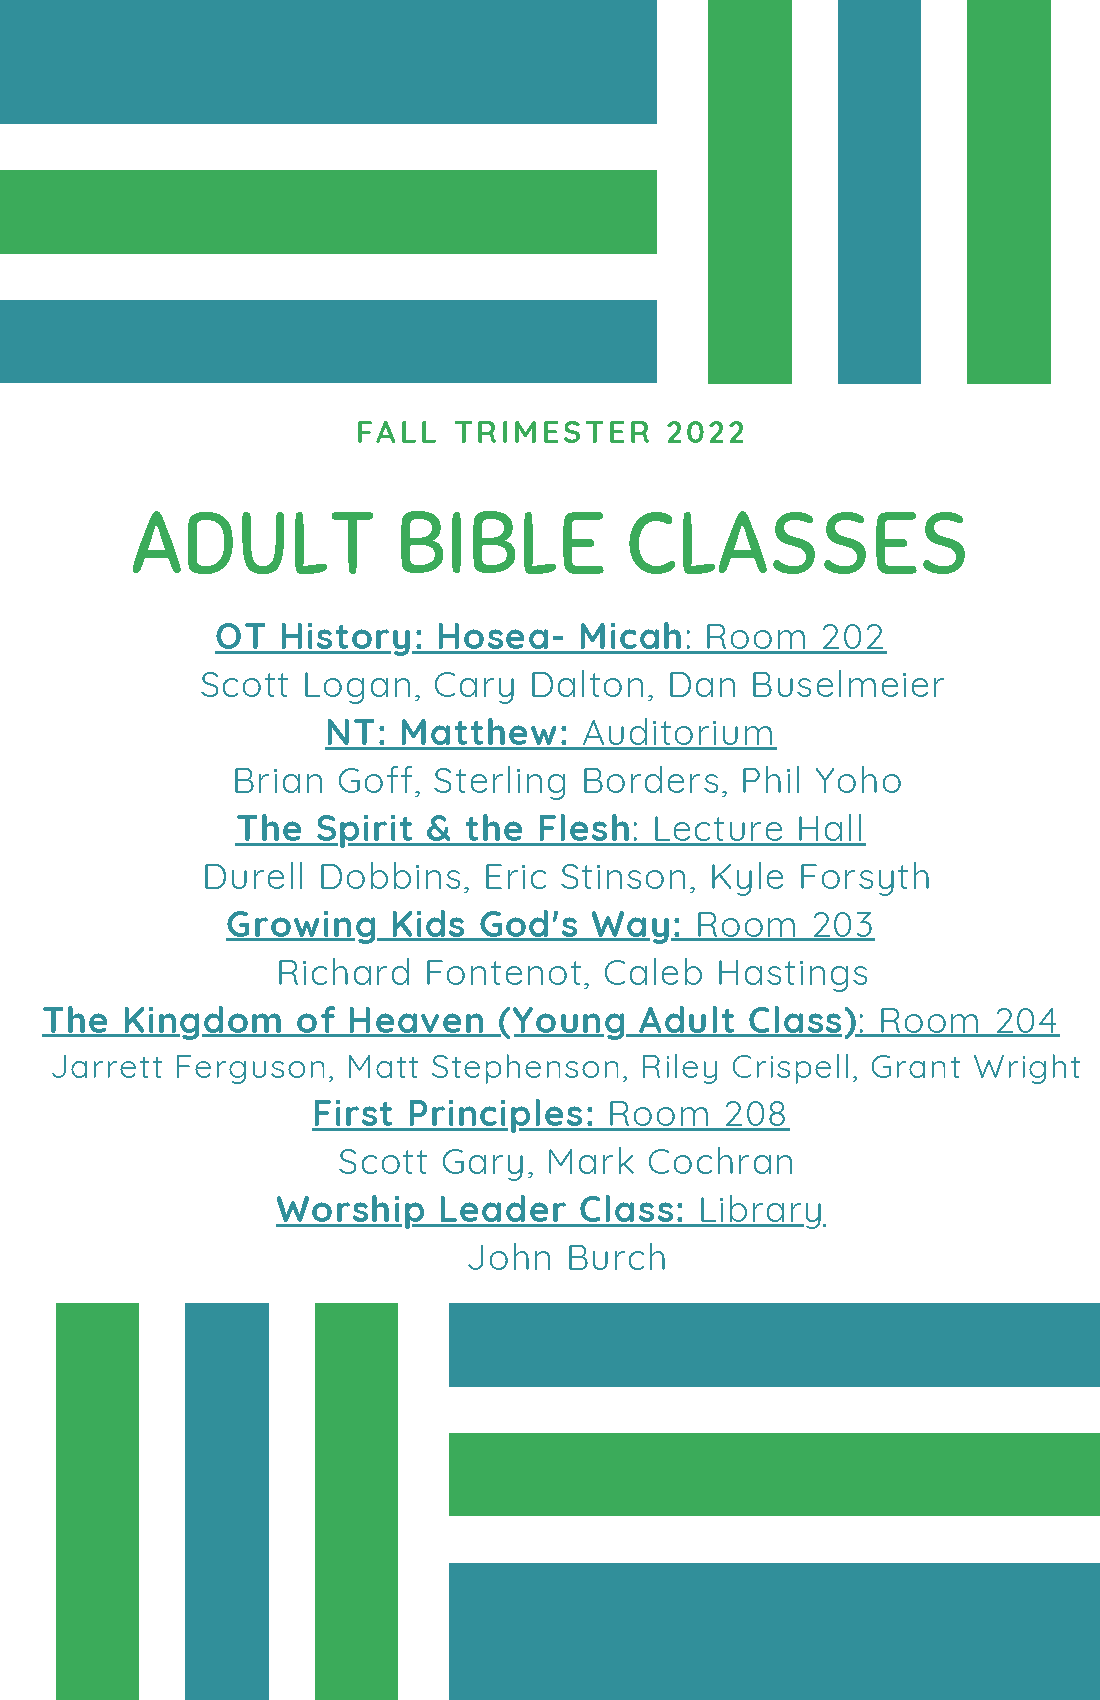 Lost River Adult Bible Classes Fall 2022